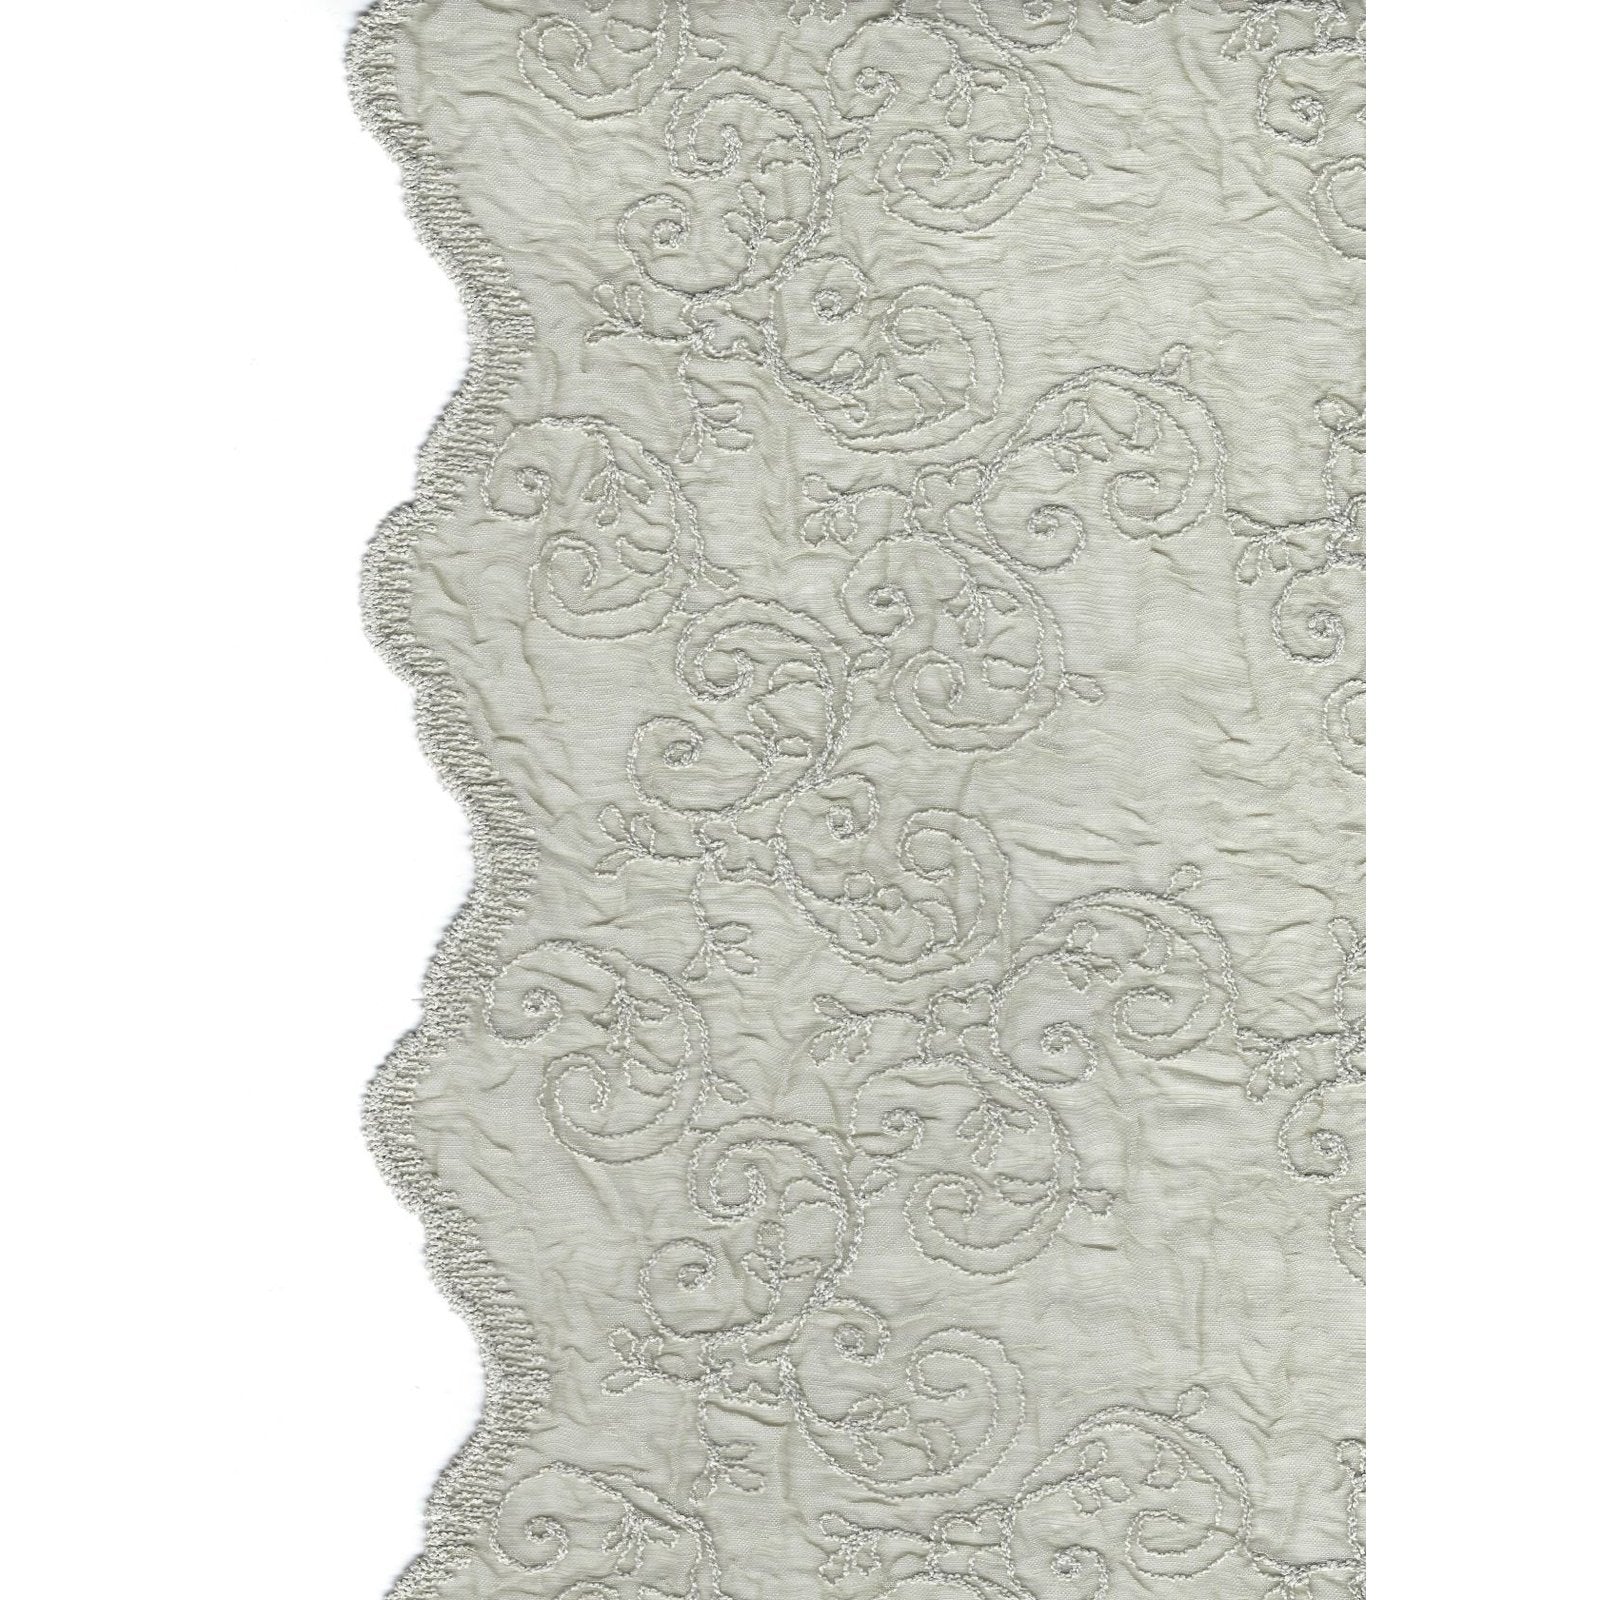 Pebbled-grey-embroidered-voile-curtain-adds-a-touch-of-sophistication-to-a-living-room.